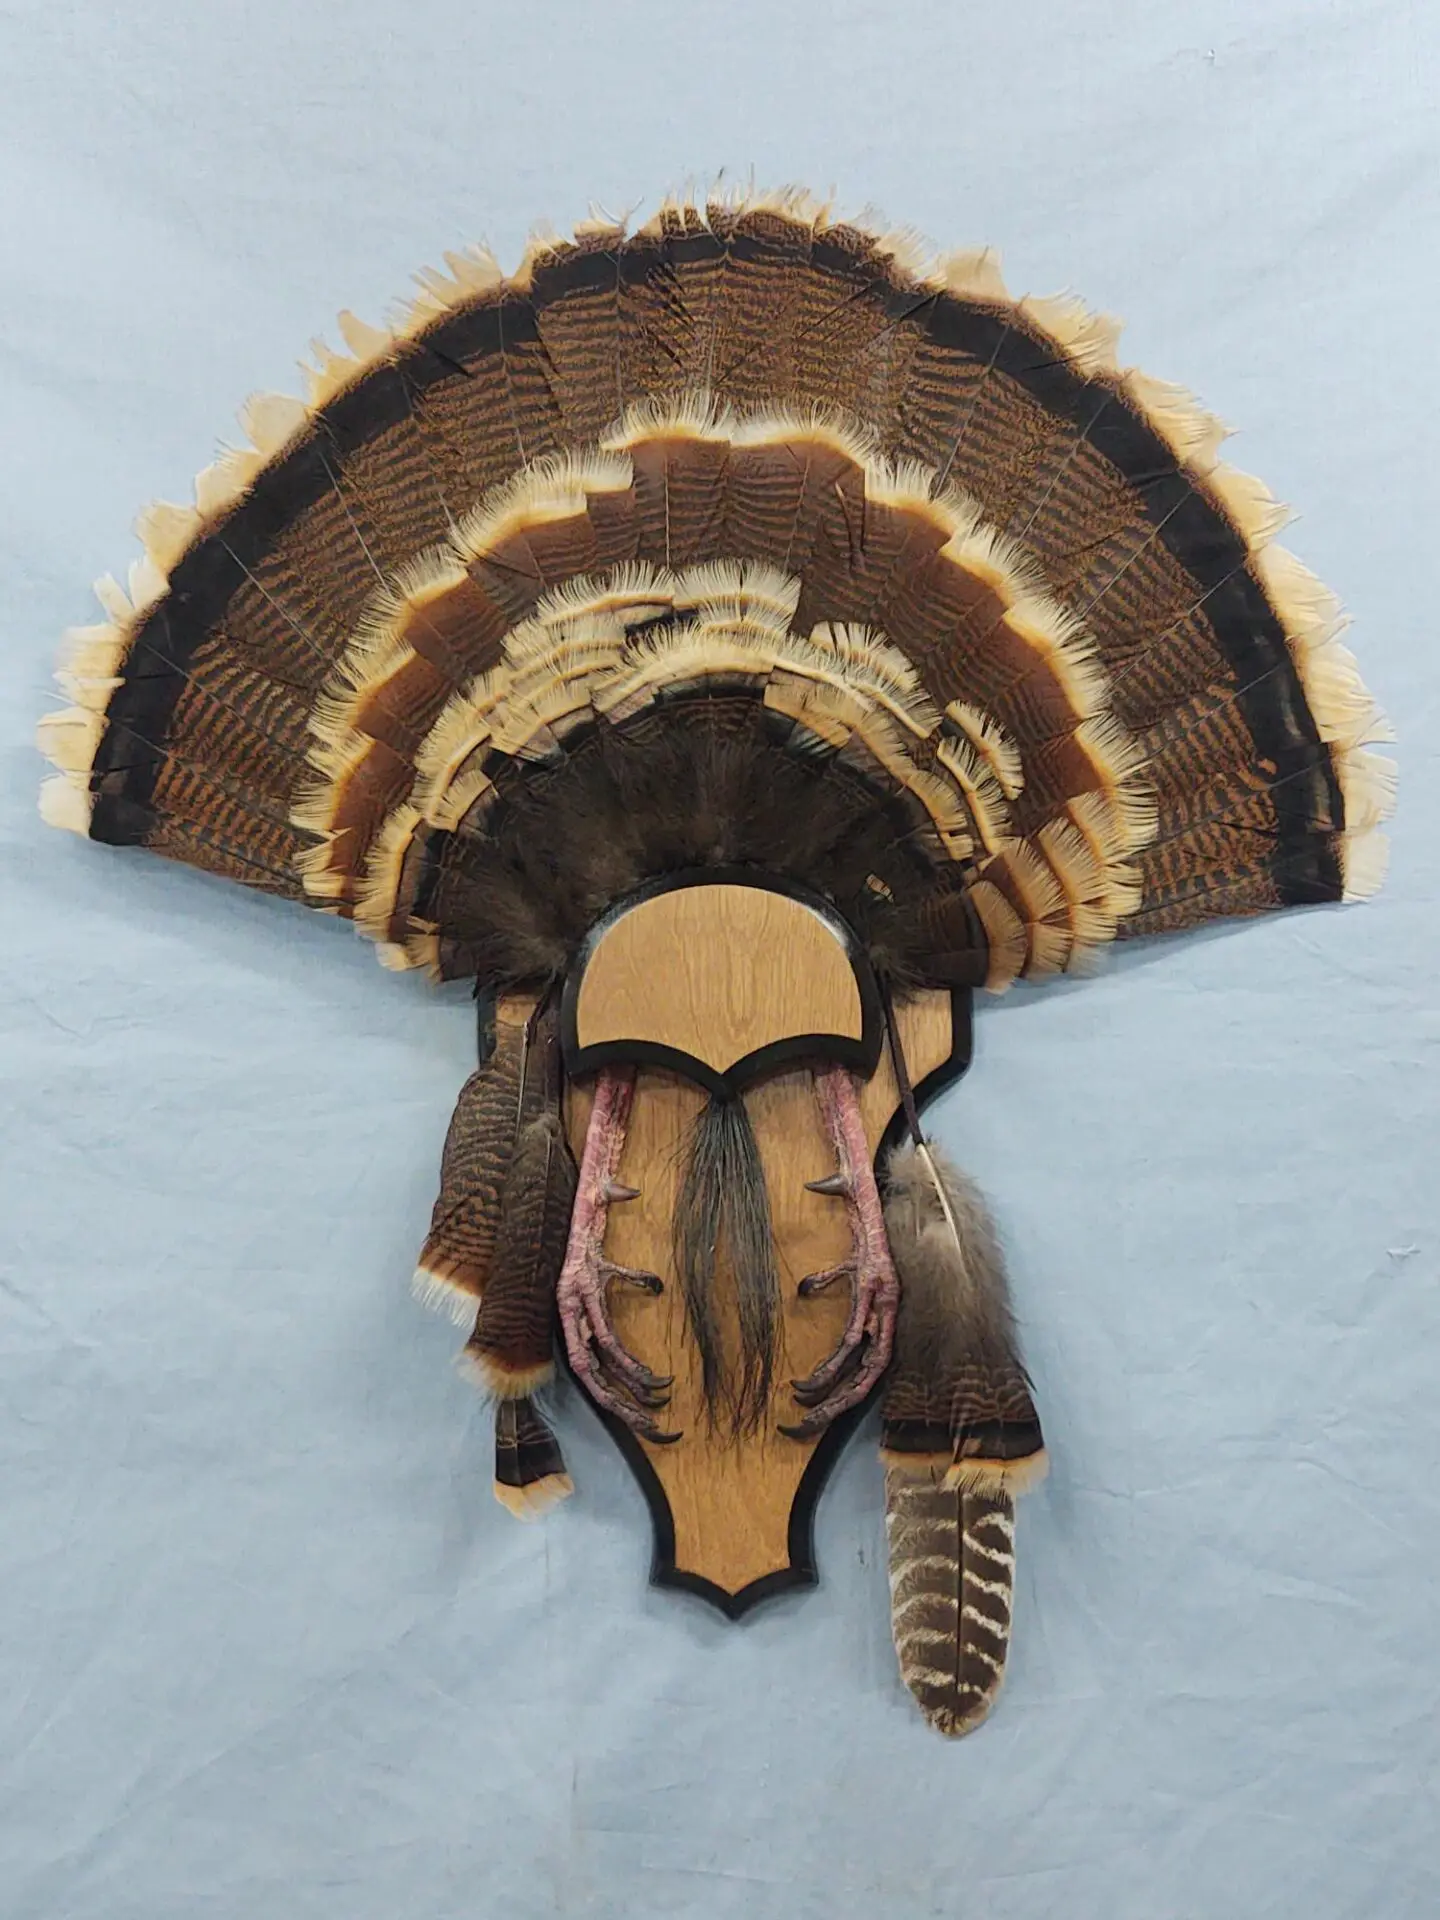 Lovely range of turkey taxidermy available for sale